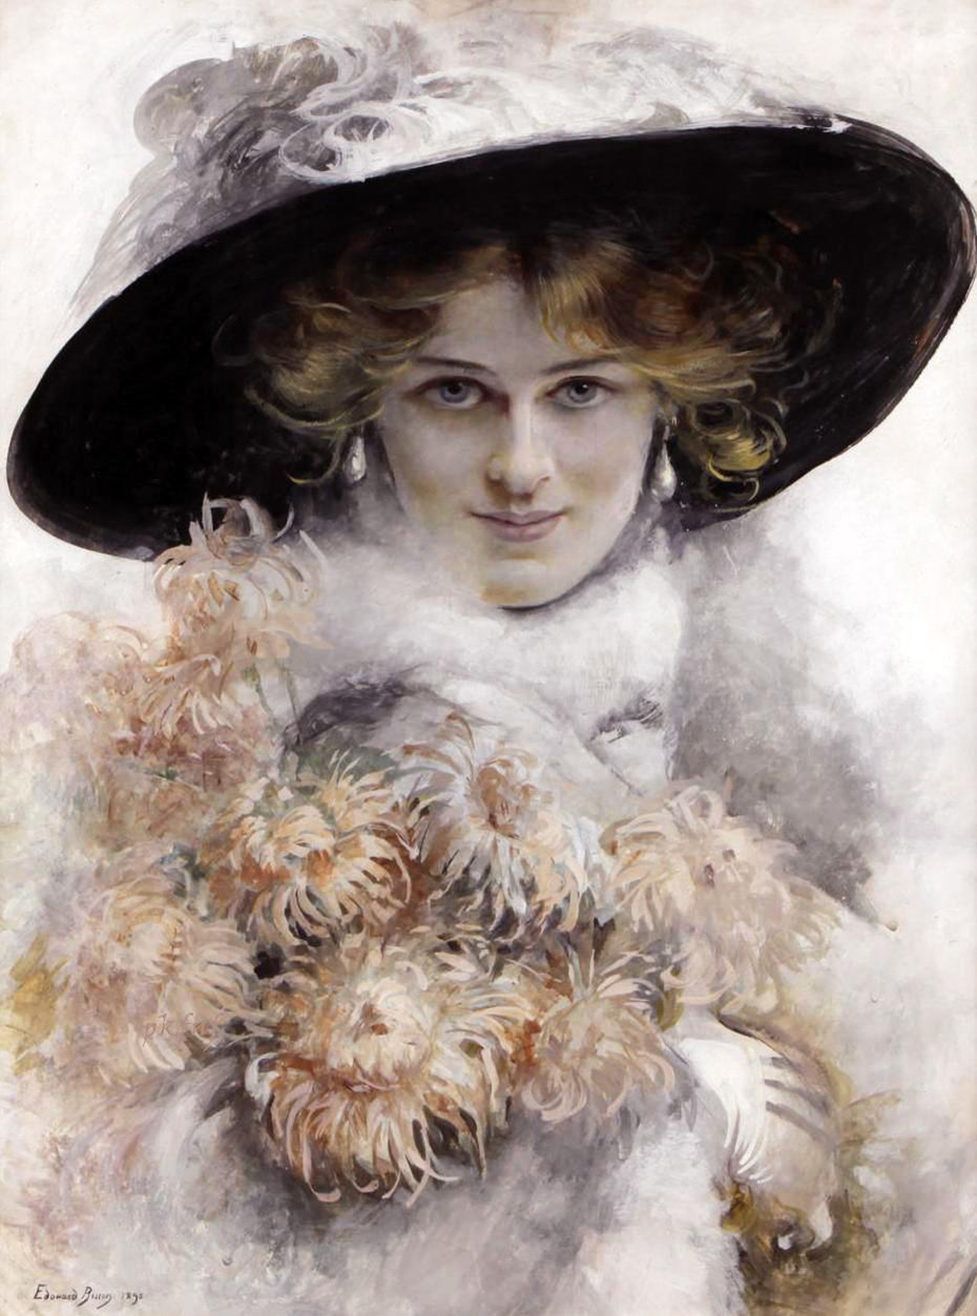 Portrait of a Lady in a Black Hat (1895). Edouard Bisson (French 1856-1939). Gouache on board.
Full title is A Portrait of a Lady in a Black Hat with a Bouquet of Flowers in her Arms. Bisson was a Pre-Raphaelite painter. He is best known for his...